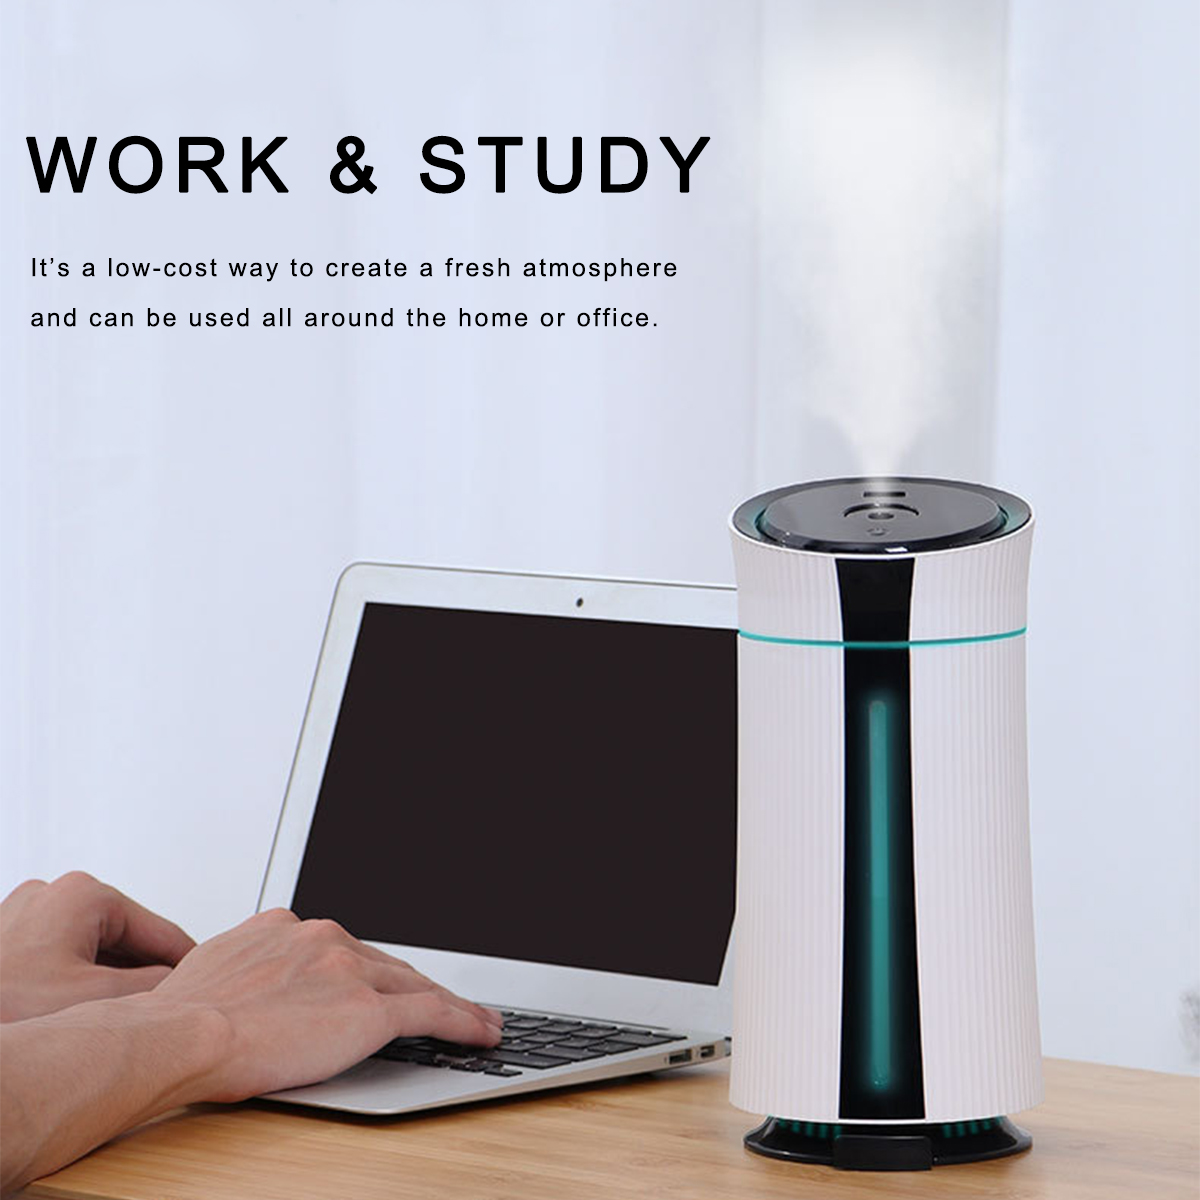 Portable-USB-Humidifier-2-Gear-Spray-Mode-Air-Diffuser-Purifier-Cool-Mist-Colorful-LED-Night-Light-L-1835241-5